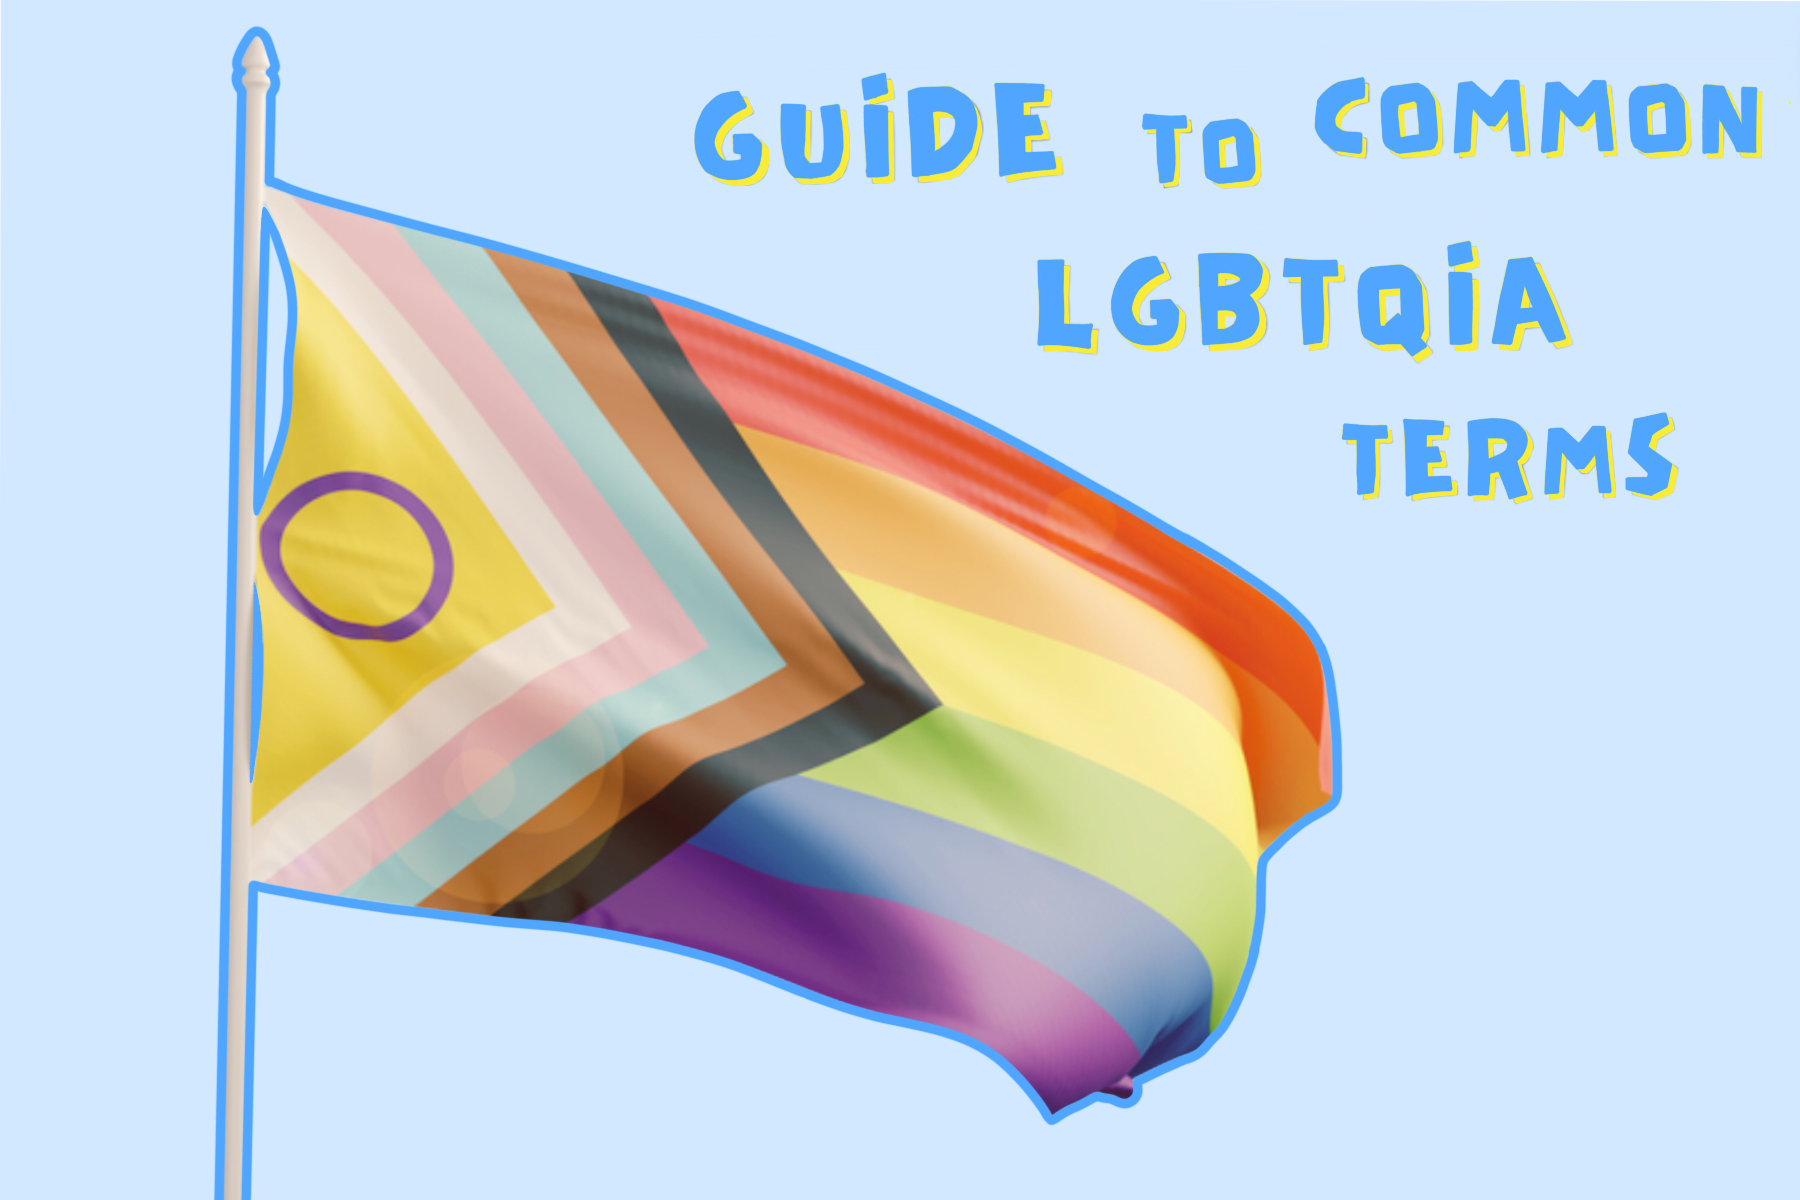 Guide to Common LGBTQIA Terms